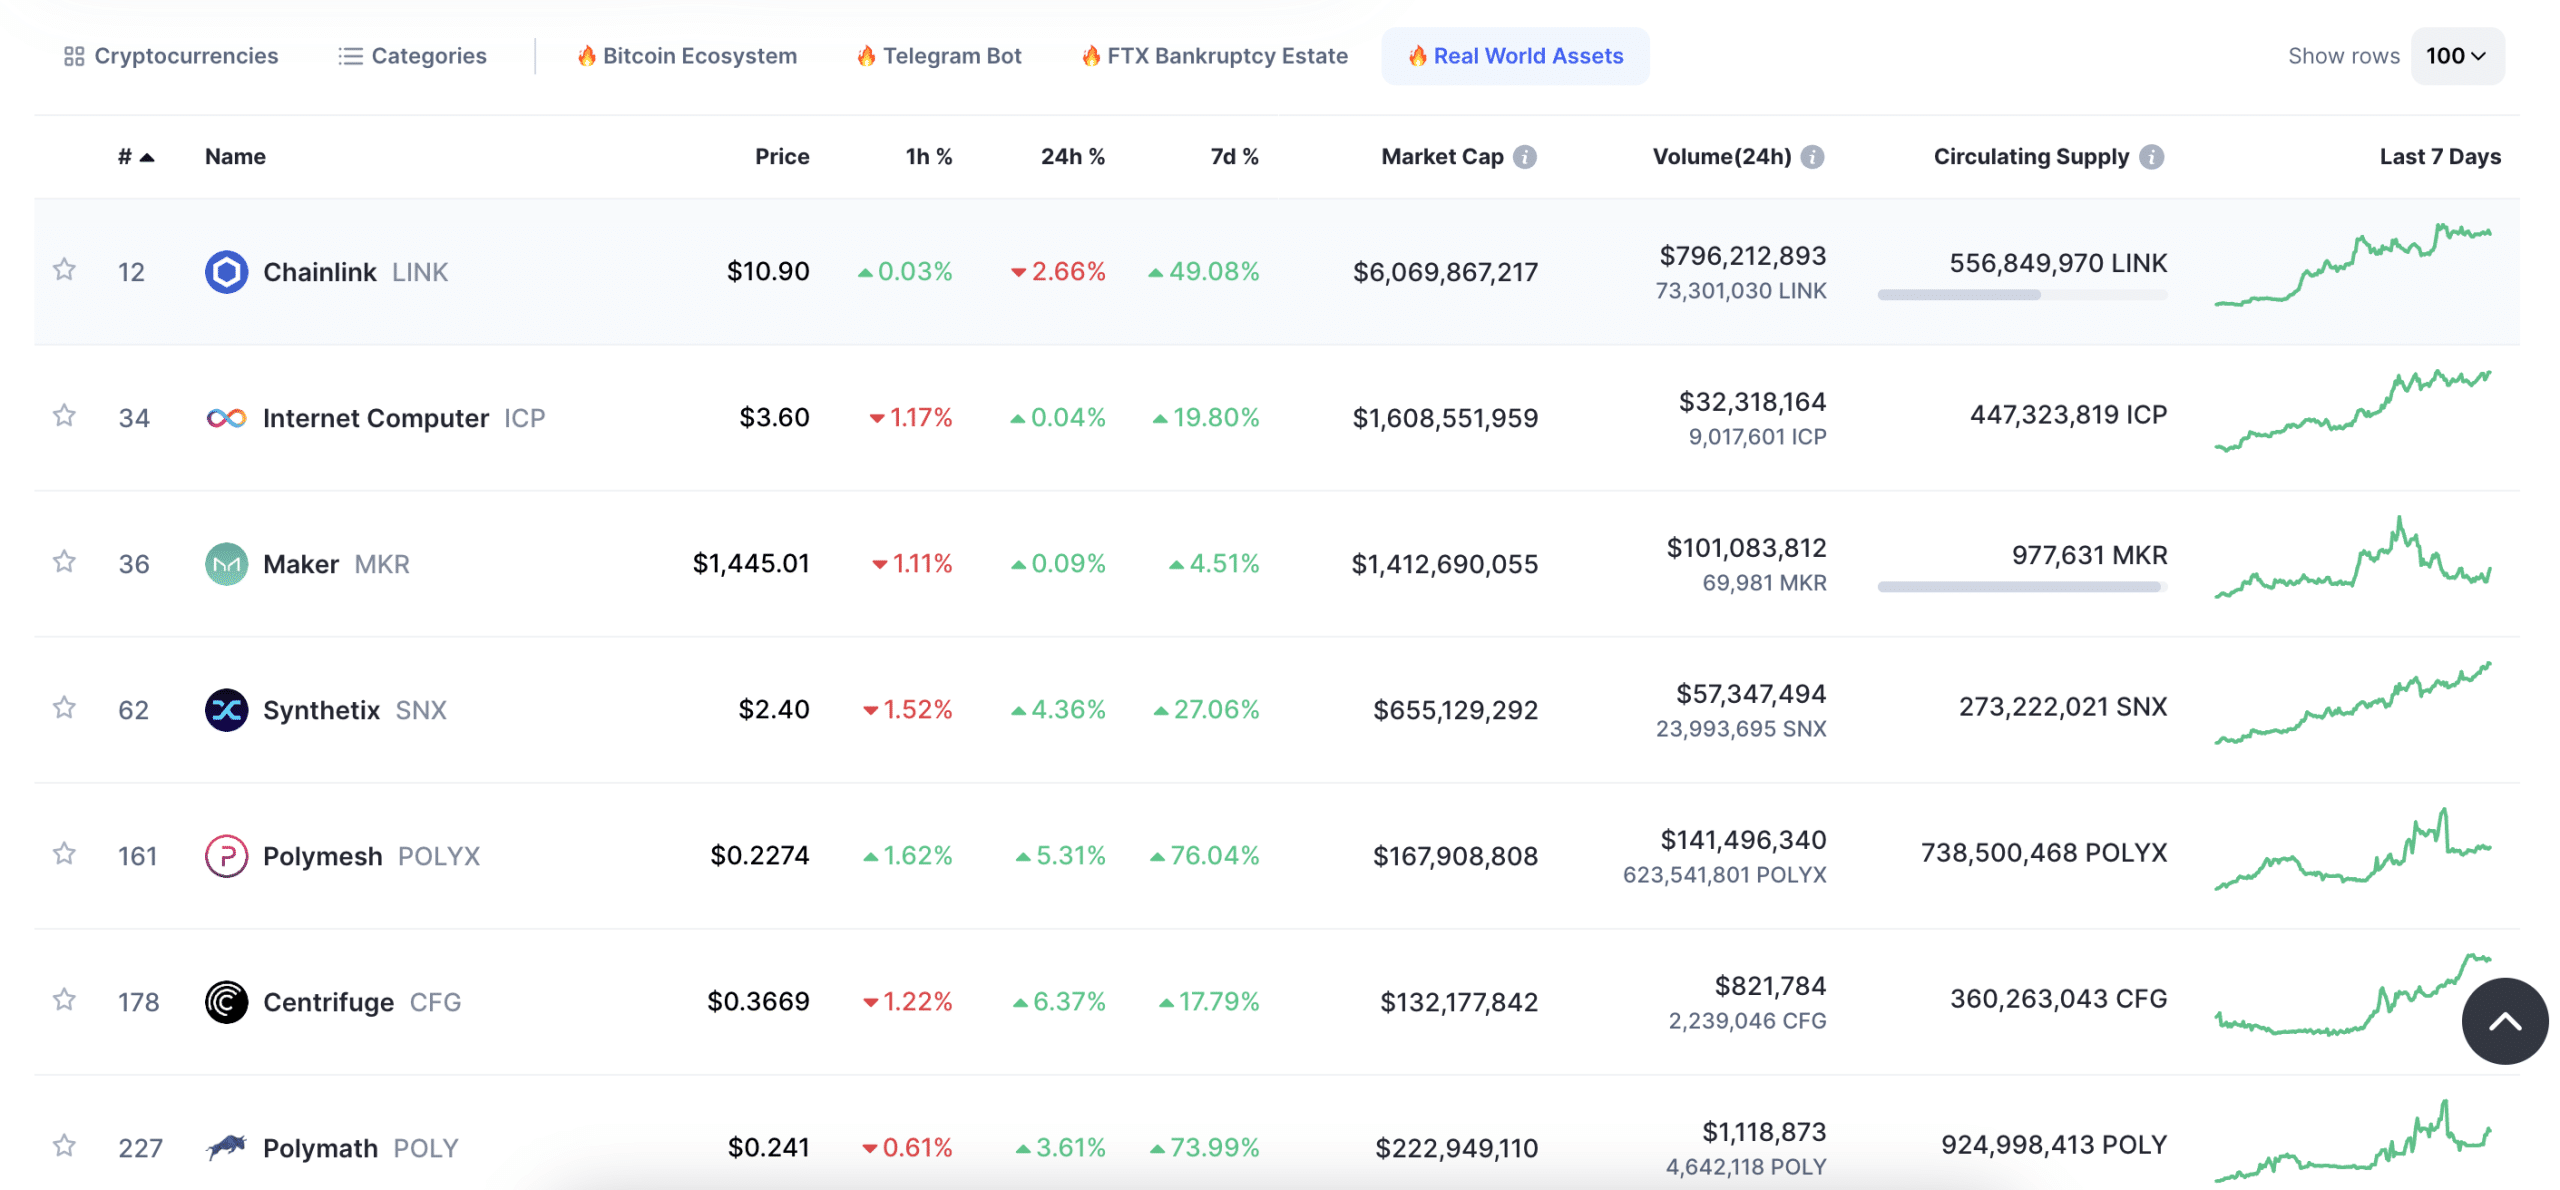 Top Real World Assets Tokens by Market Capitalization